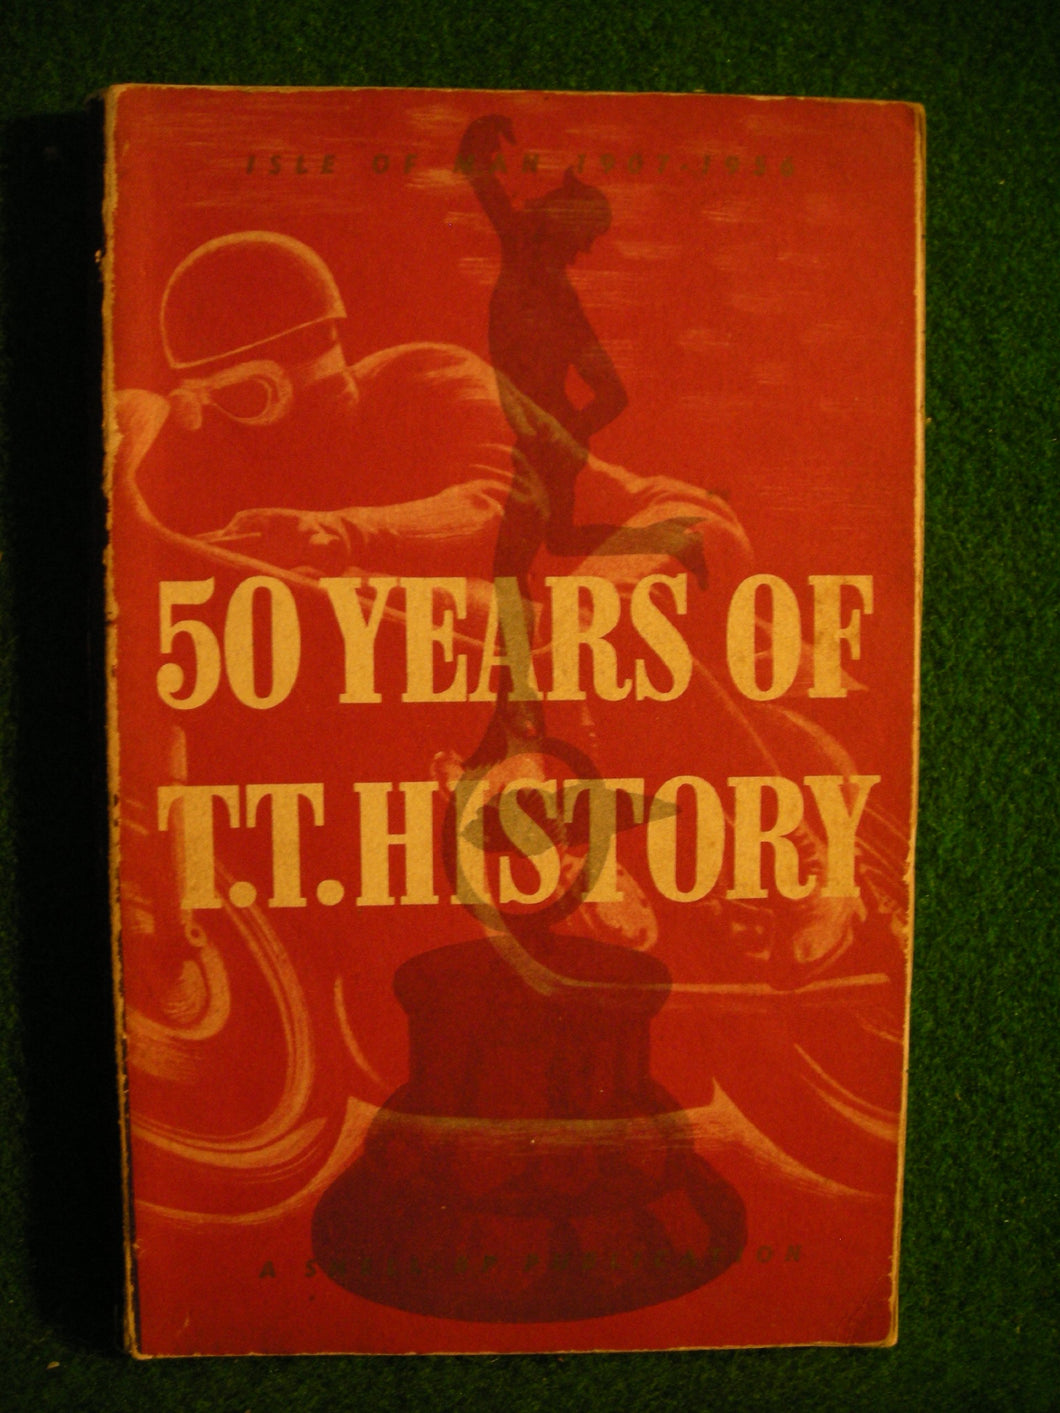 50 years of T.T. history